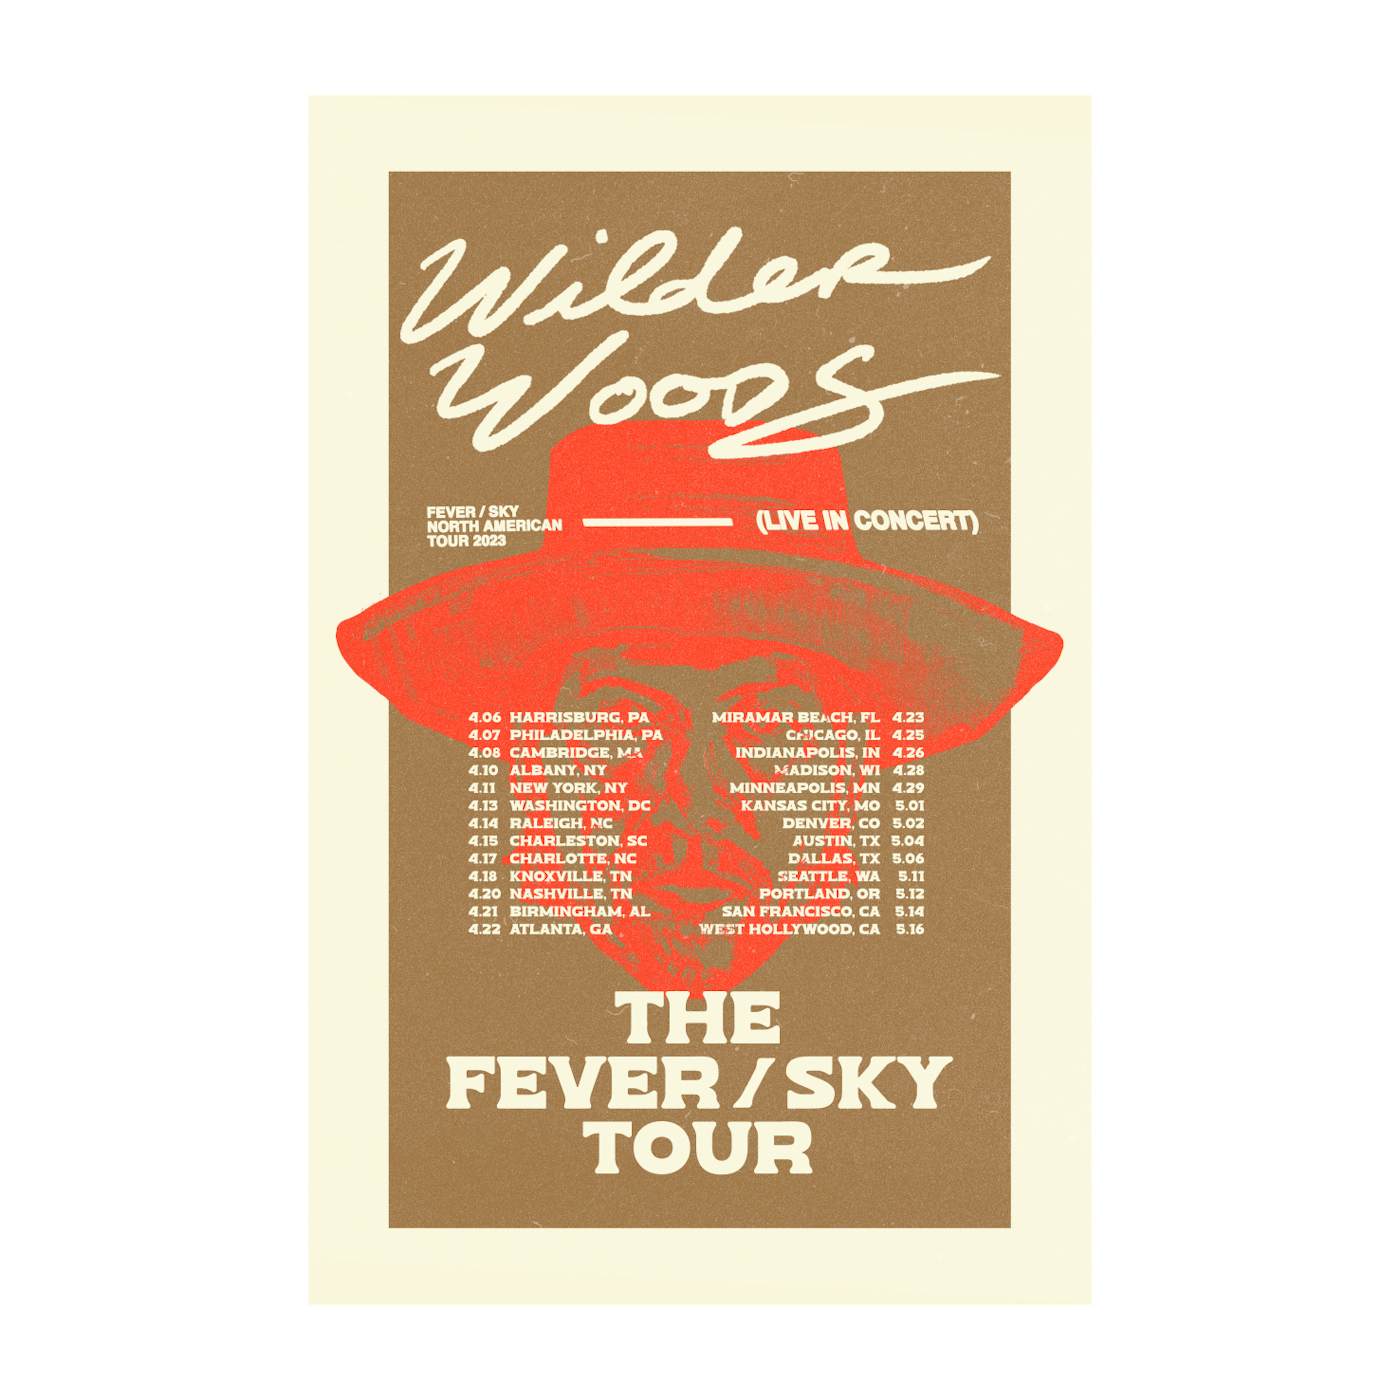 Wilder Woods [AUTOGRAPHED] FEVER / SKY Tour Poster